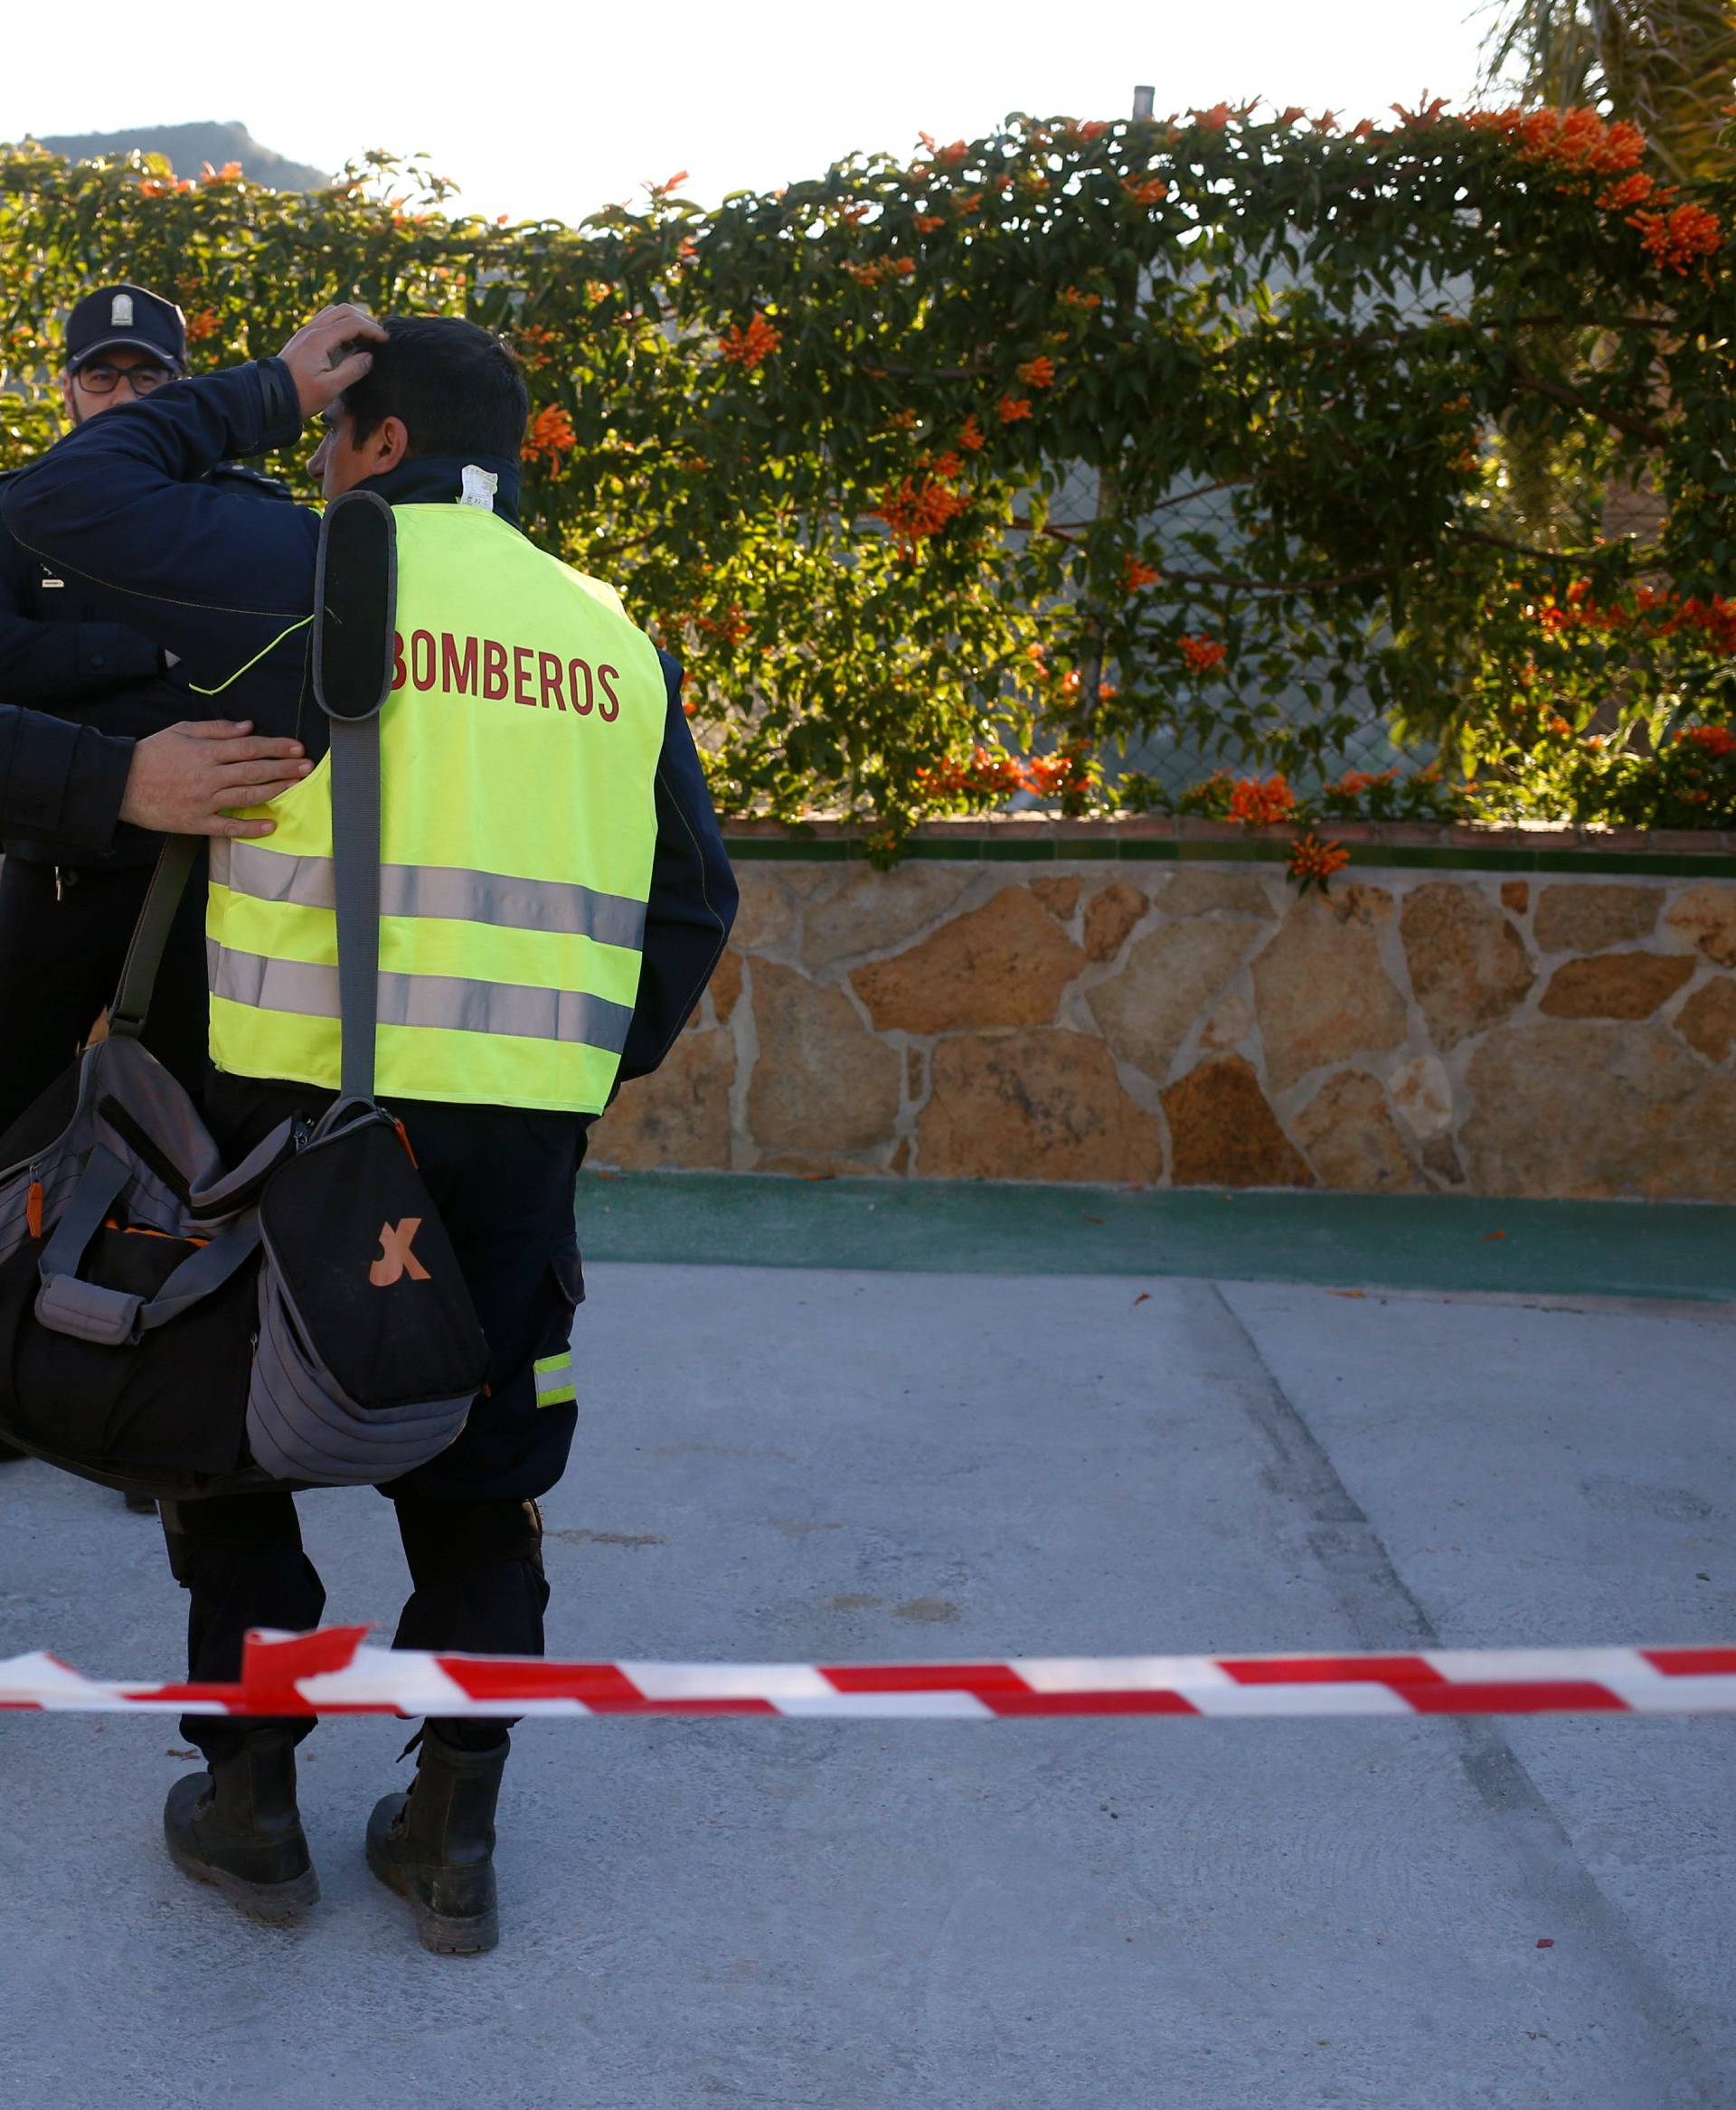 A firefighter reacts as he chats with Spanish regional police officers outside the control center after he left the area where Julen, a Spanish two-year-old boy, fell into a deep well, in Totalan